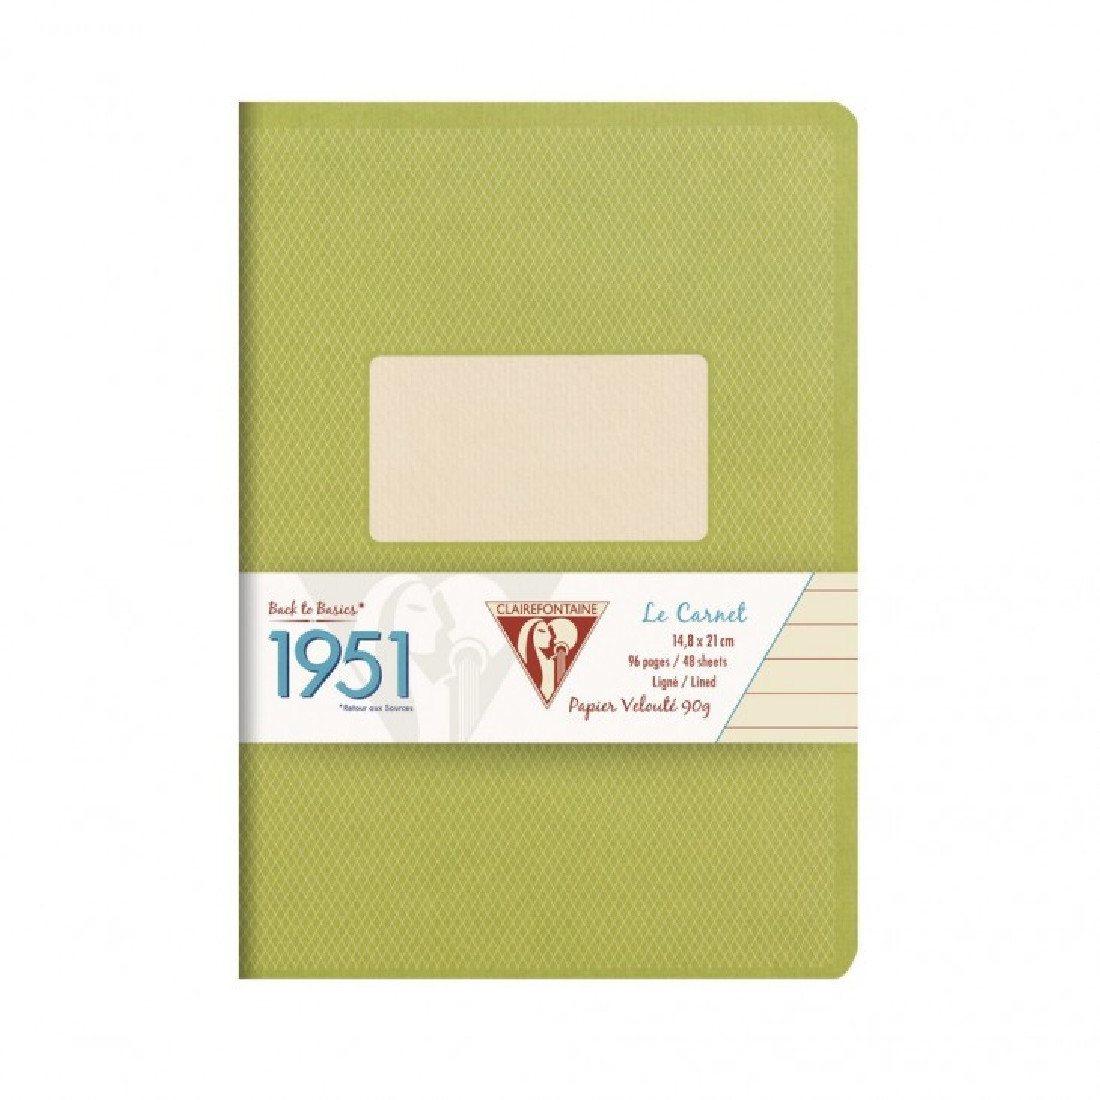 Clairefontaine notebook 1951 lined A5 14,8X21 96 pages 90gr 195136c green